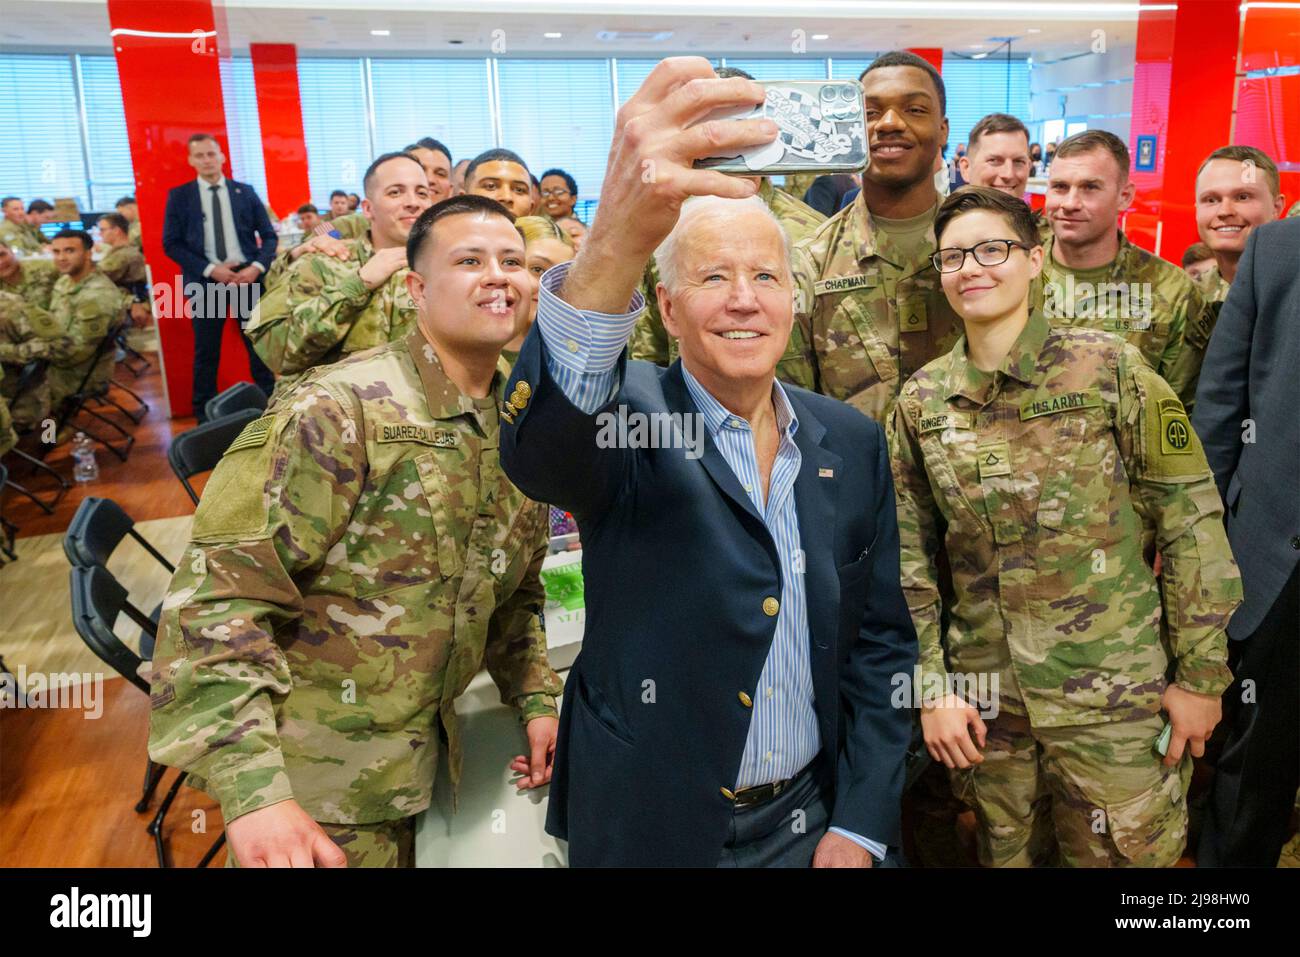 Rzeszow, Poland. 25 March, 2022. U.S President Joe Biden, takes a selfie with members of the U.S. Army 82nd Airborne Division during a visit March 25, 2022 in Rzeszow, Poland.  Credit: Adam Schultz/White House Photo/Alamy Live News Stock Photo